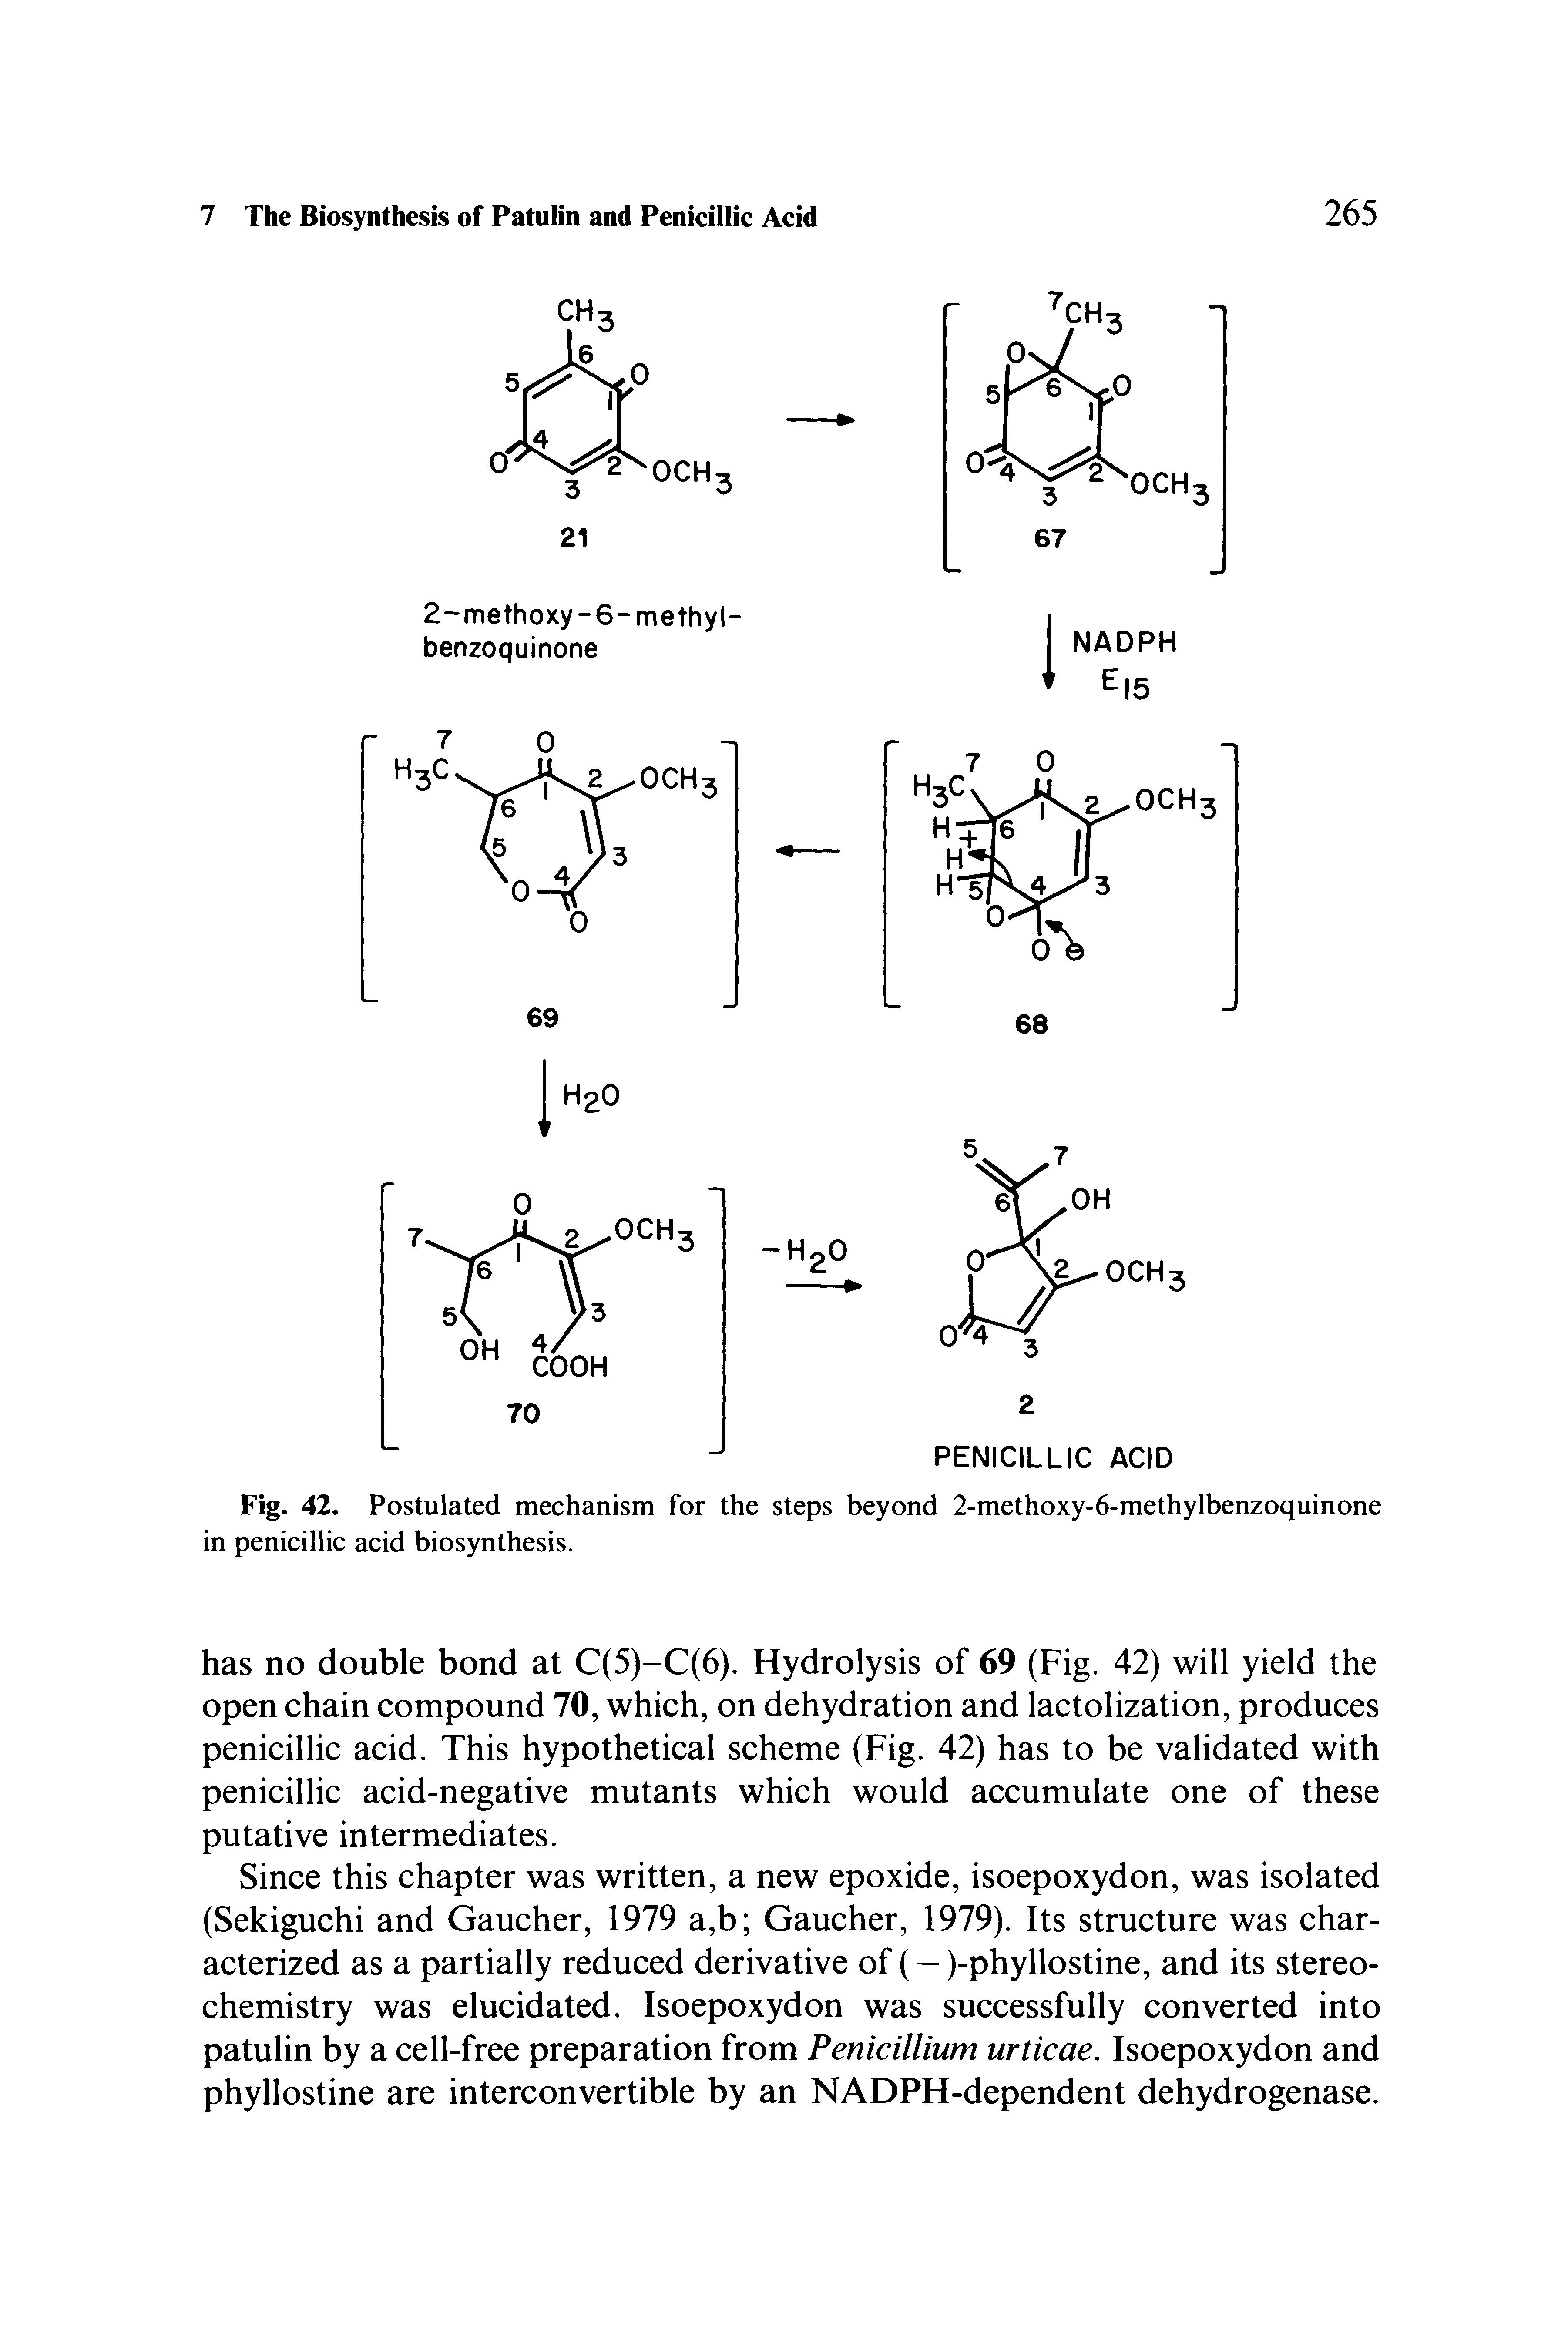 Fig. 42. Postulated mechanism for the steps beyond 2-methoxy-6-methylbenzoquinone in penicillic acid biosynthesis.